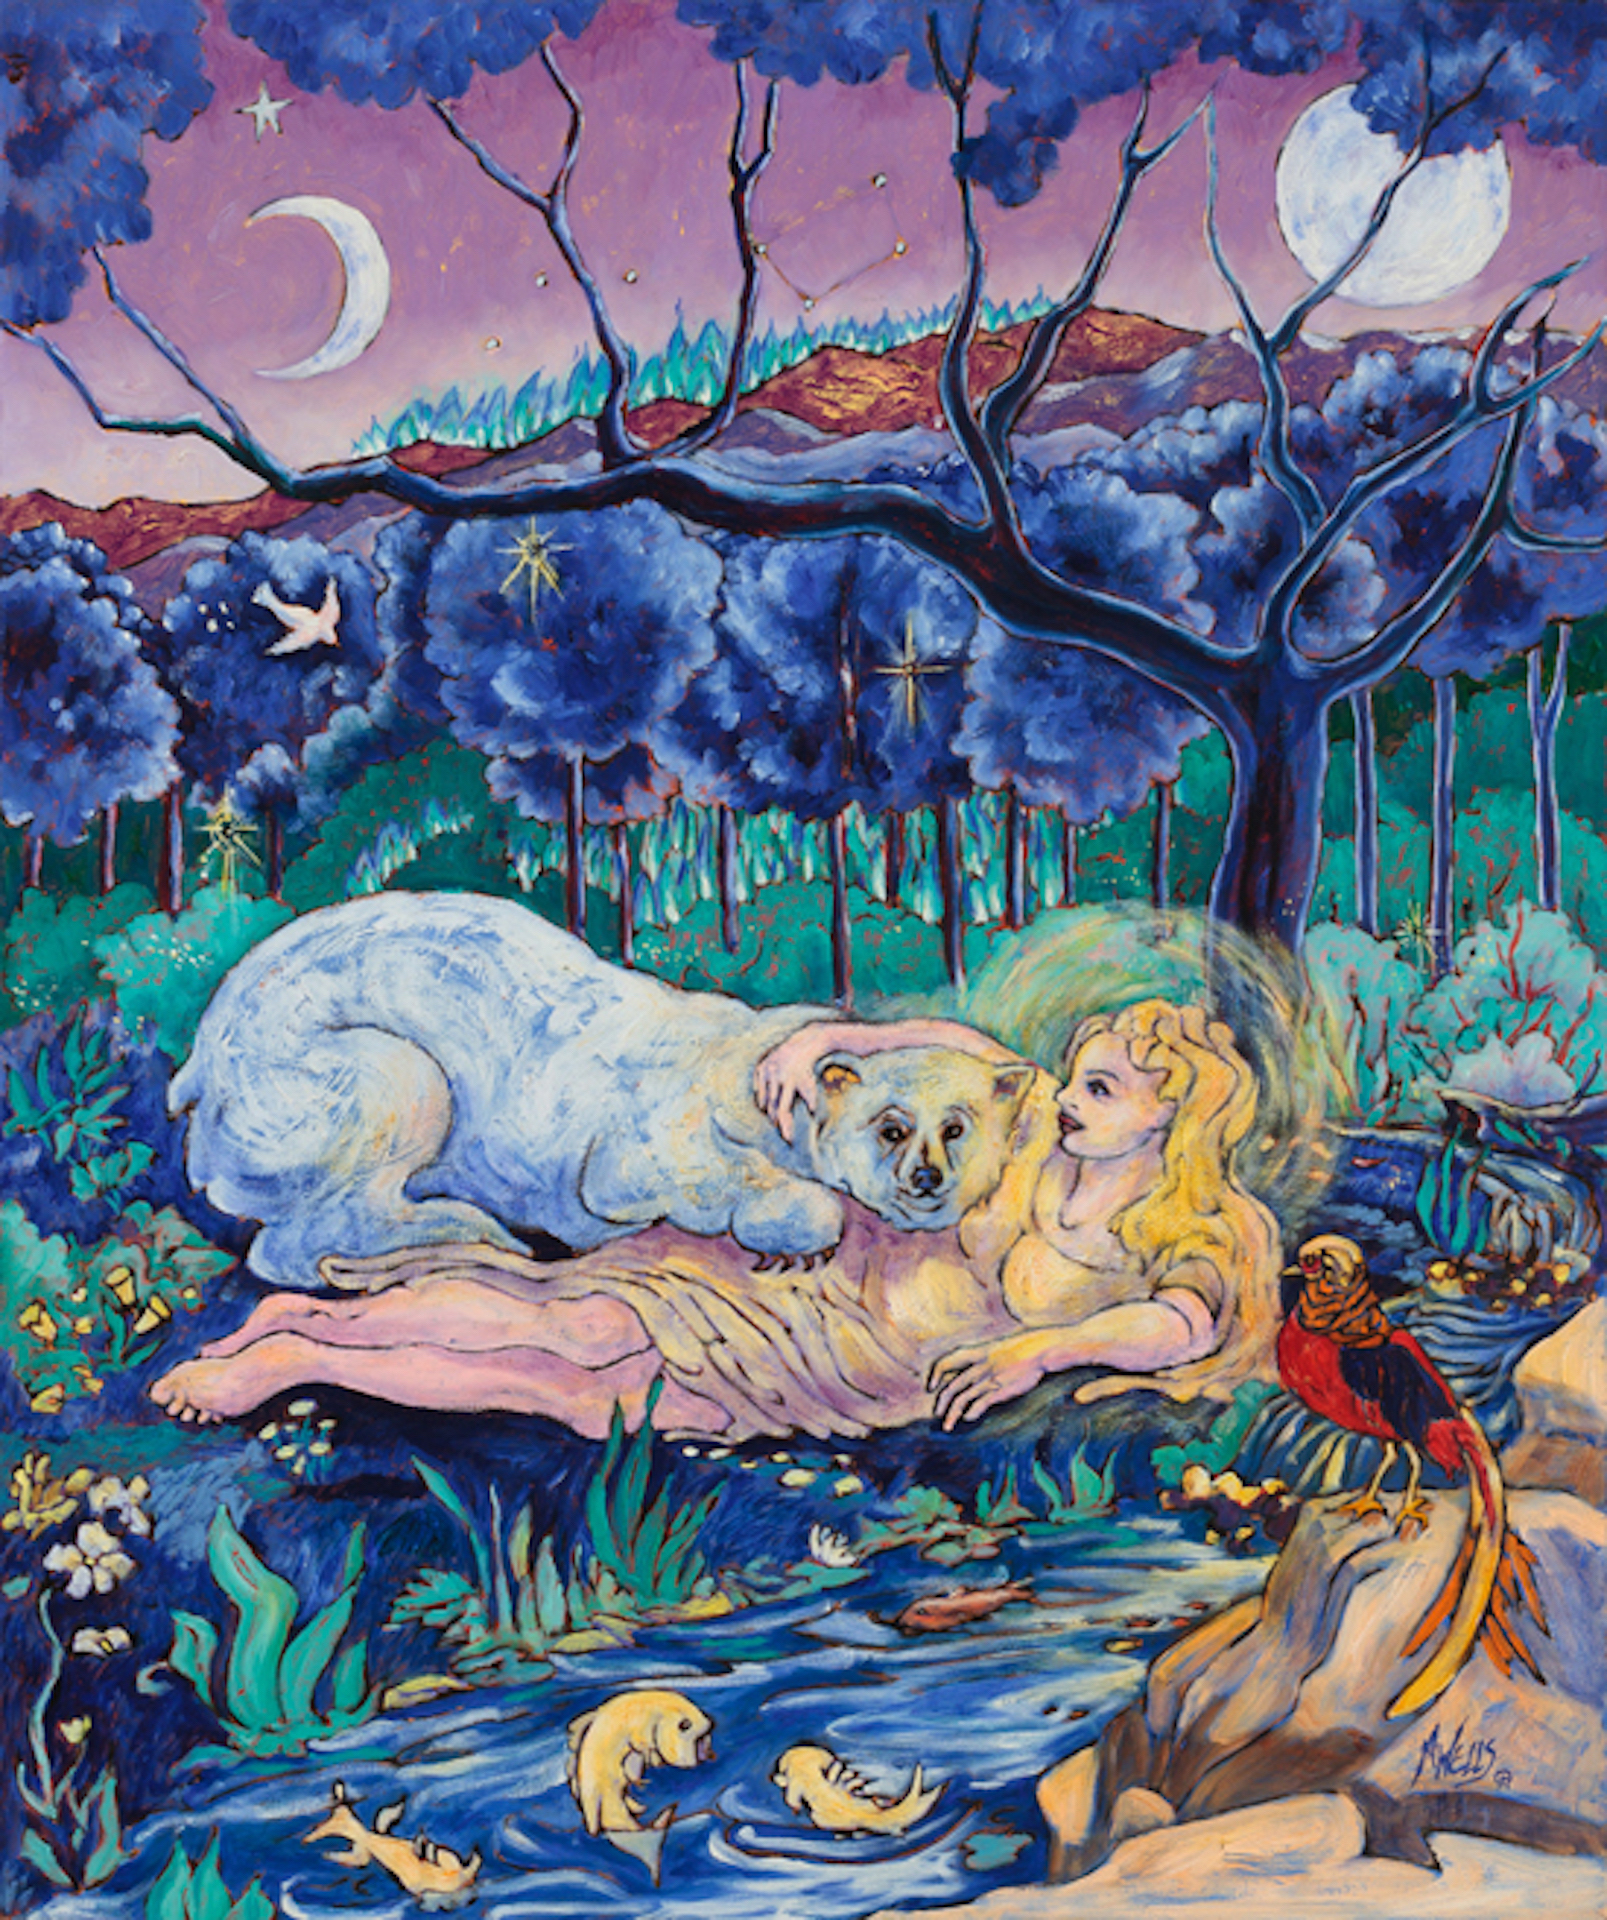 "East of the Sun, West of the Moon" by Marilyn Wells, 20" x 24" colorful oil painting, of a beautiful maiden with the Bear she comes to love in a magical setting.